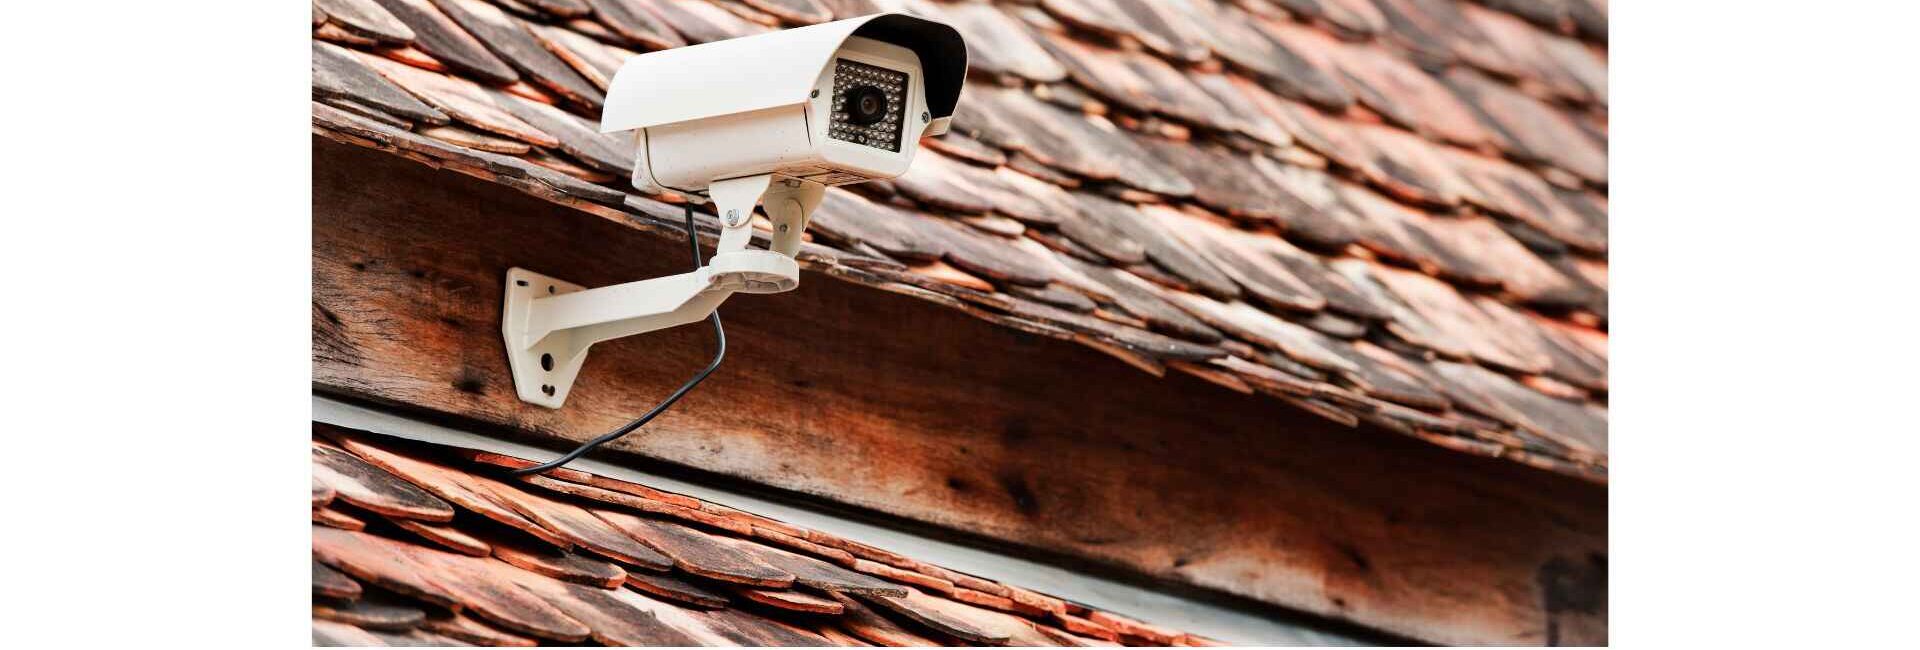 Camera Store Noida - Security System Dealer and Supplier in Noida